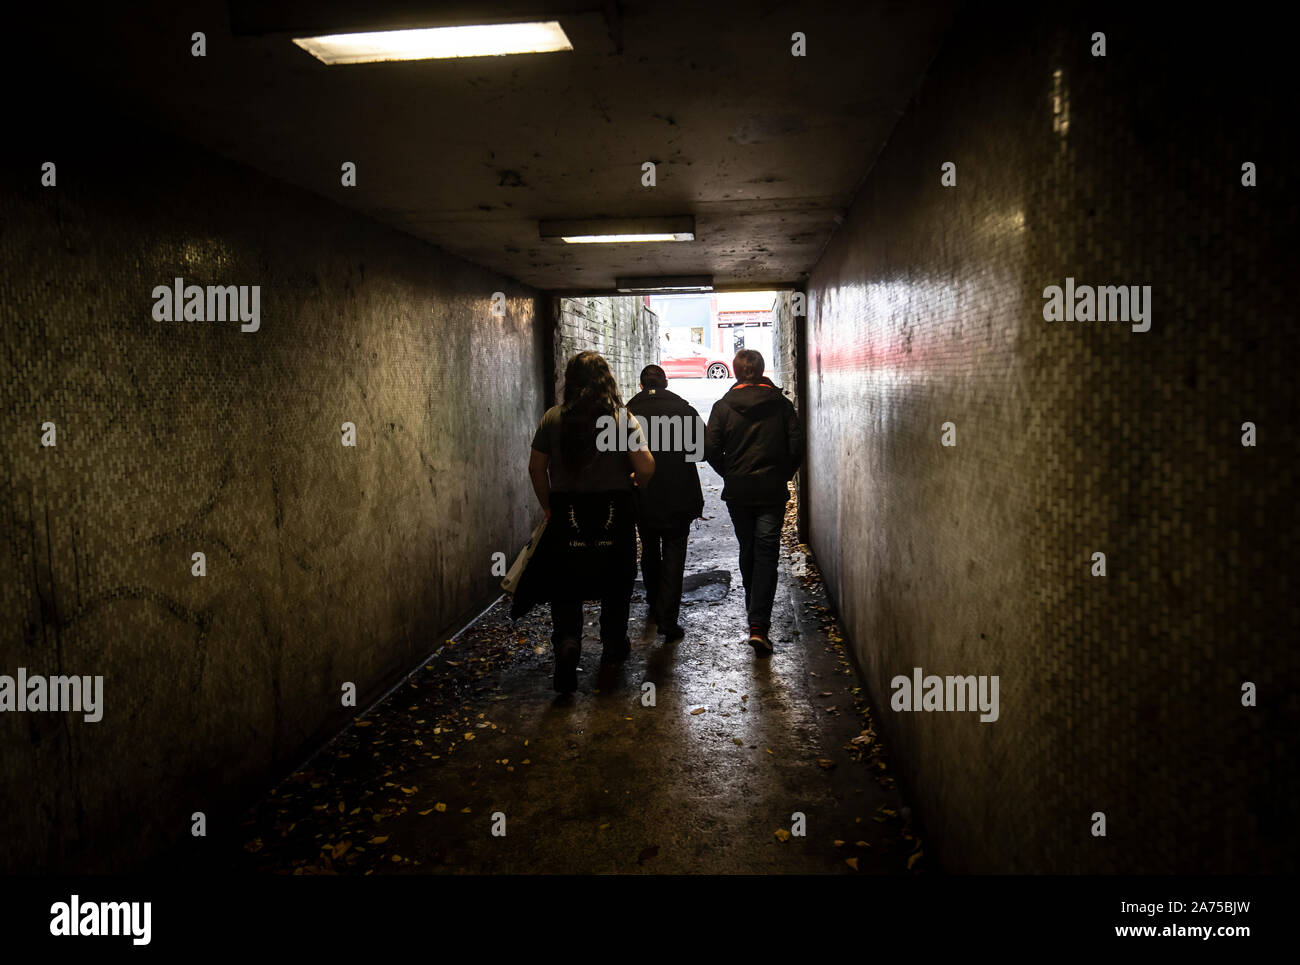 People walk along a underpass in Halifax in Yorkshire, as a think tank says the Conservatives will have to target traditional Labour voters from regional towns in order to win the general election. PA Photo. Picture date: Wednesday October 30, 2019. The Conservatives will have to target traditional Labour voters from regional towns such as Workington in order to win the Christmas general election, according to a think tank. The group urged the party to target towns including Halifax, Warrington, Wigan and Workington in order to gain these key regional seats. Photo credit should read: Danny Law Stock Photo